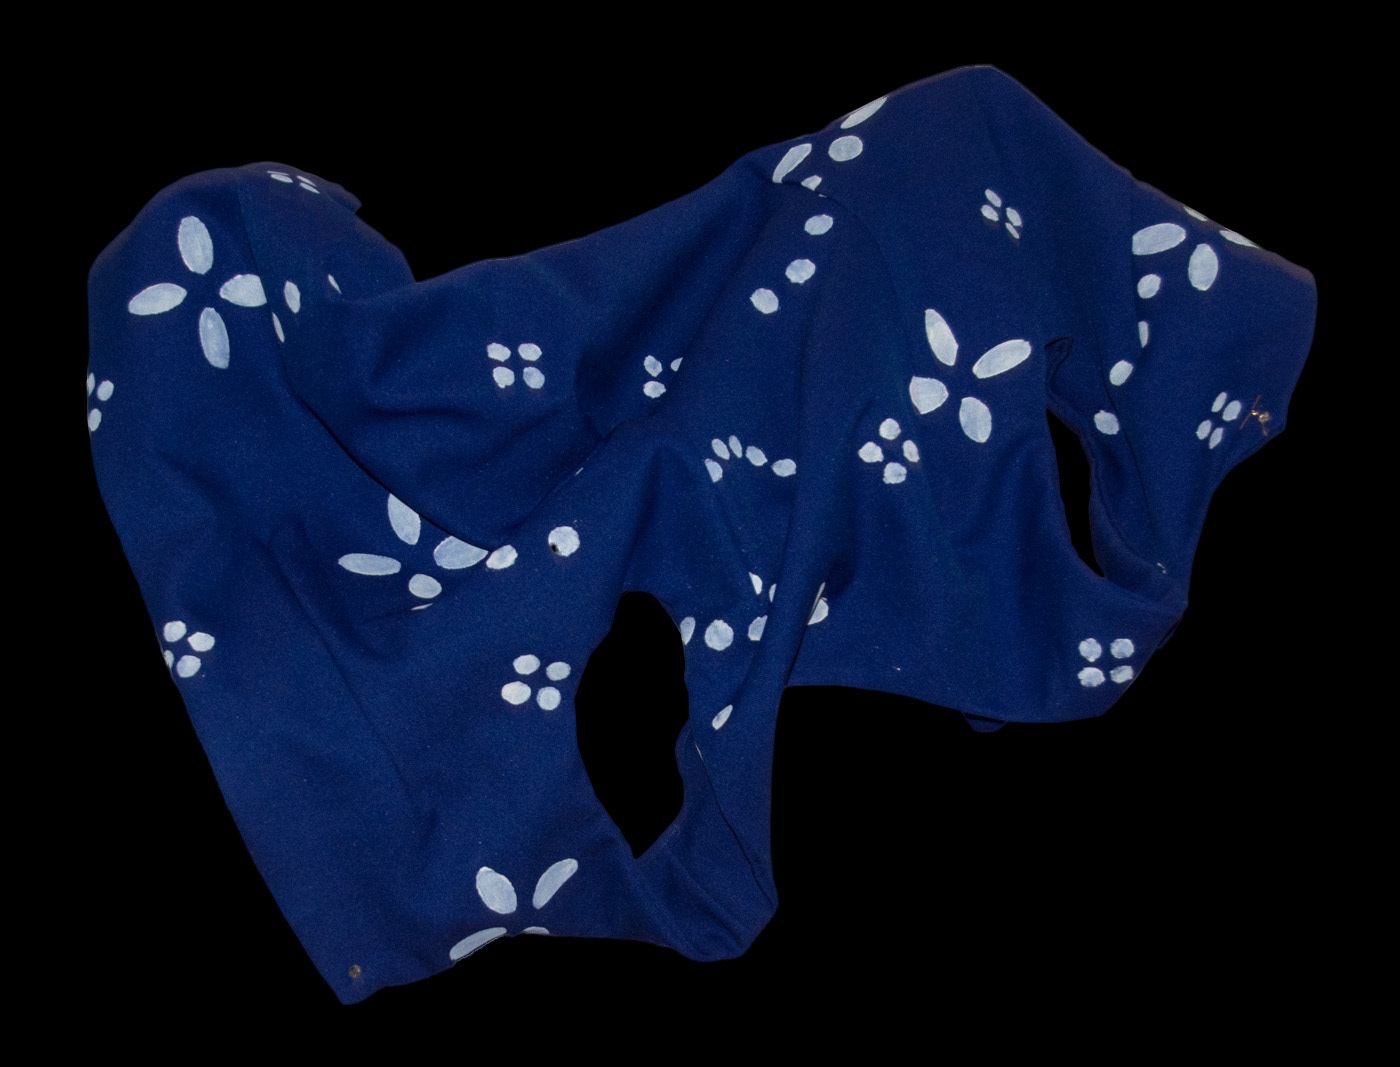 an image of a blue garment with various white painted patterns on it